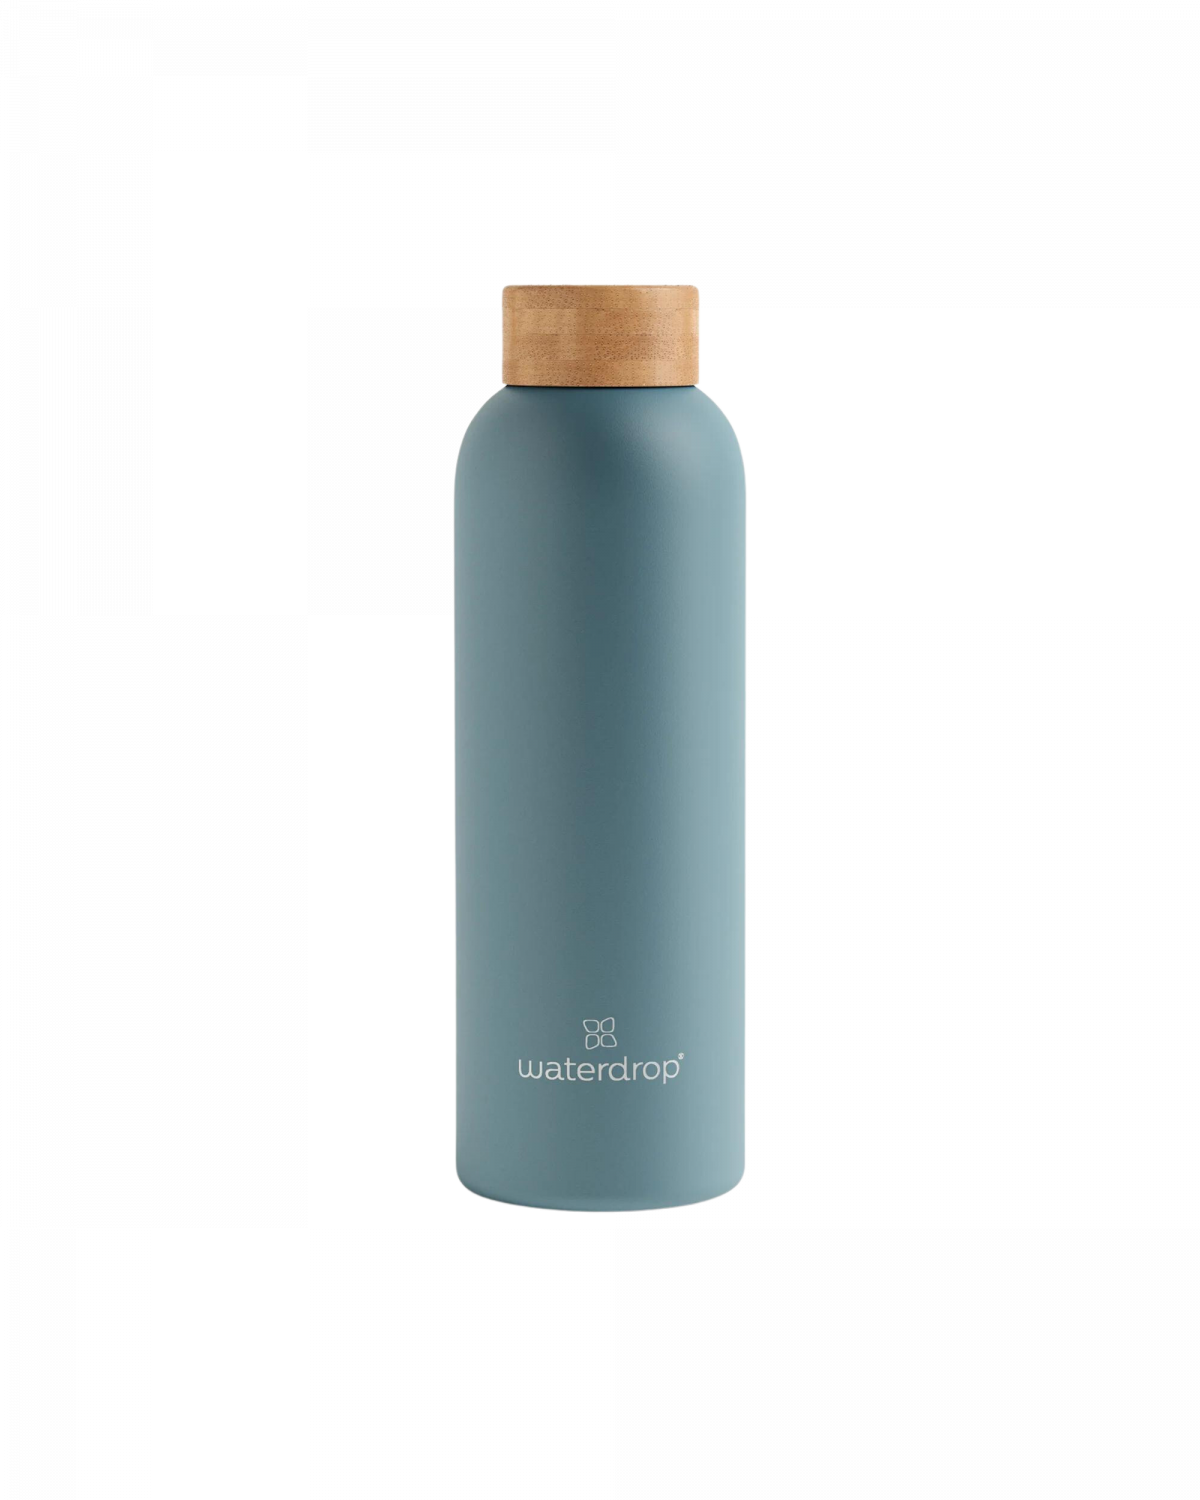 Bouteille thermo inox turquoise Waterdrop - bouteille isotherme en